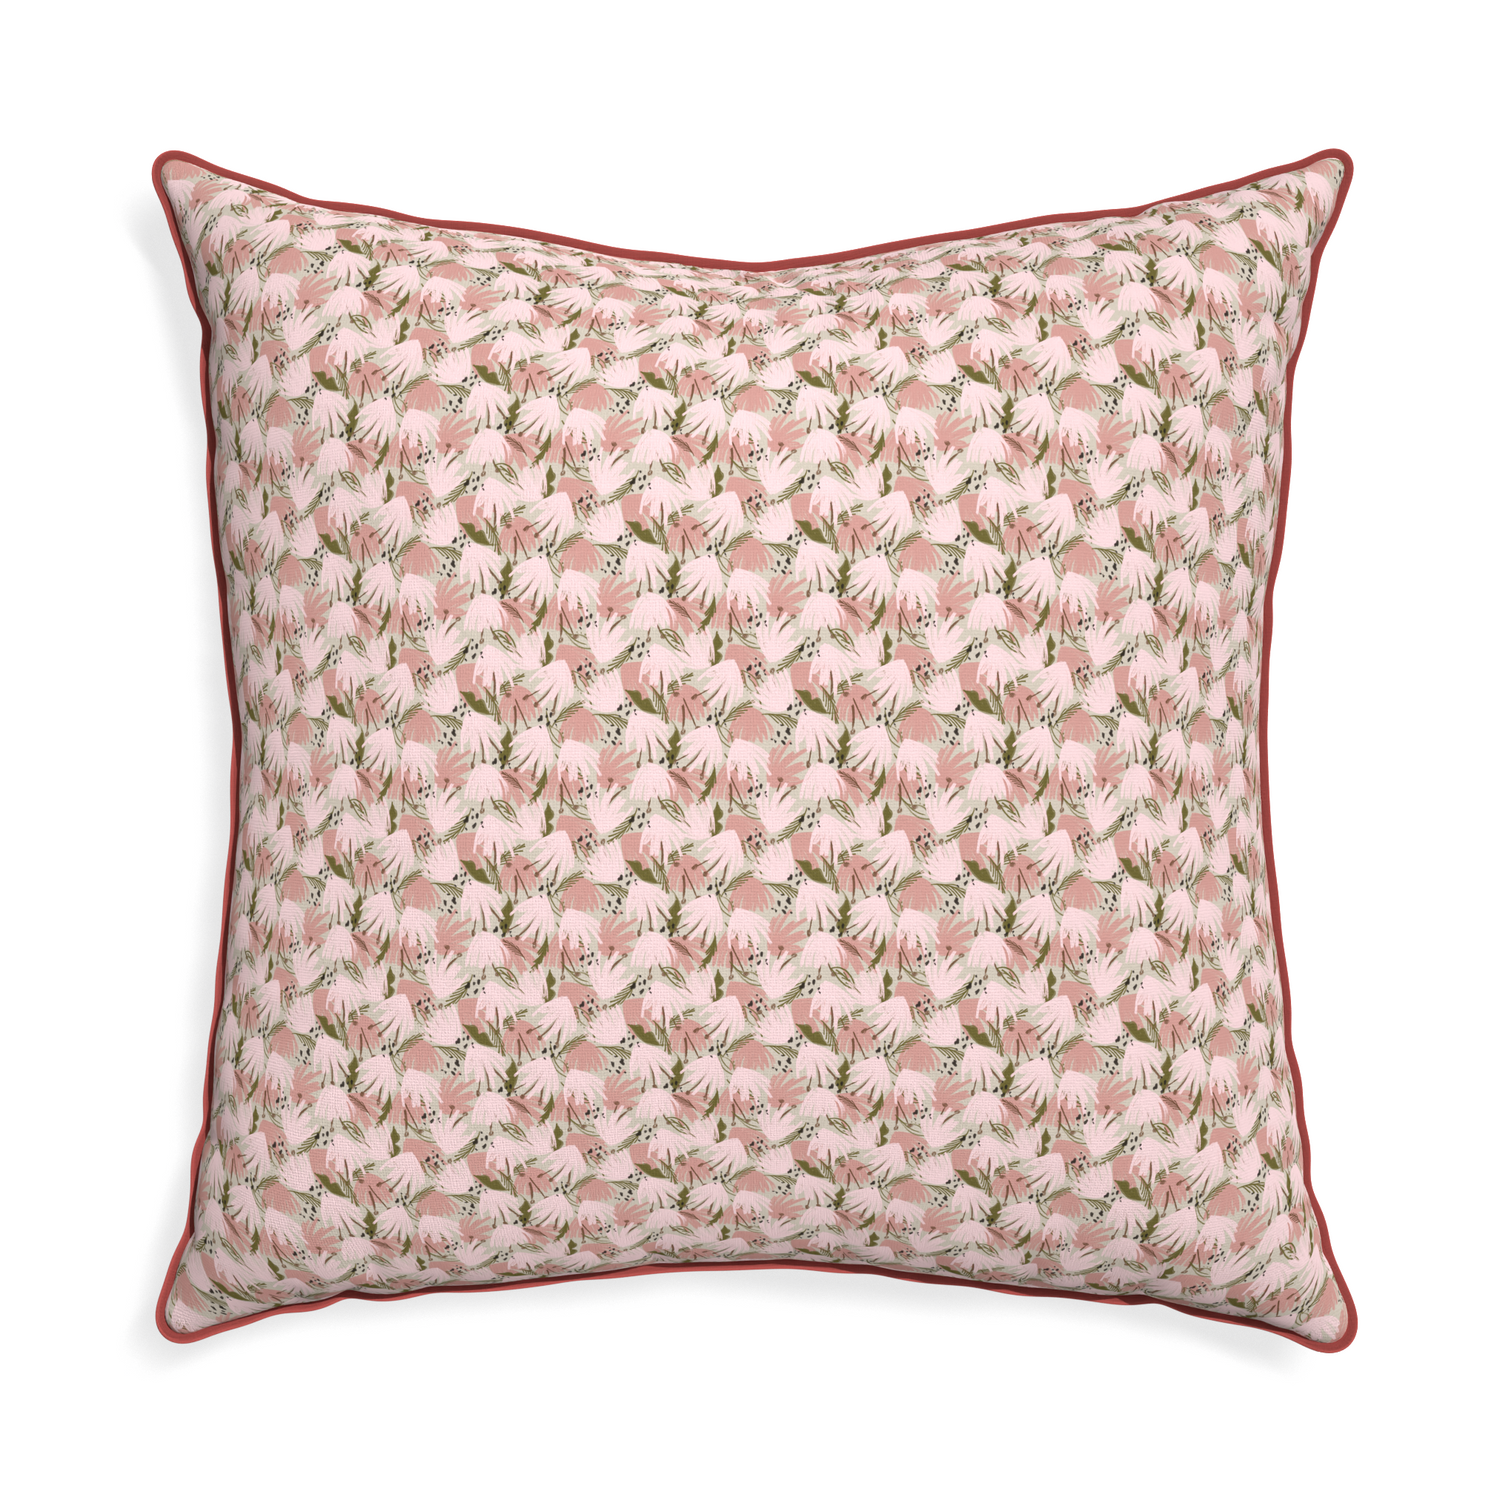 Euro-sham eden pink custom pillow with c piping on white background